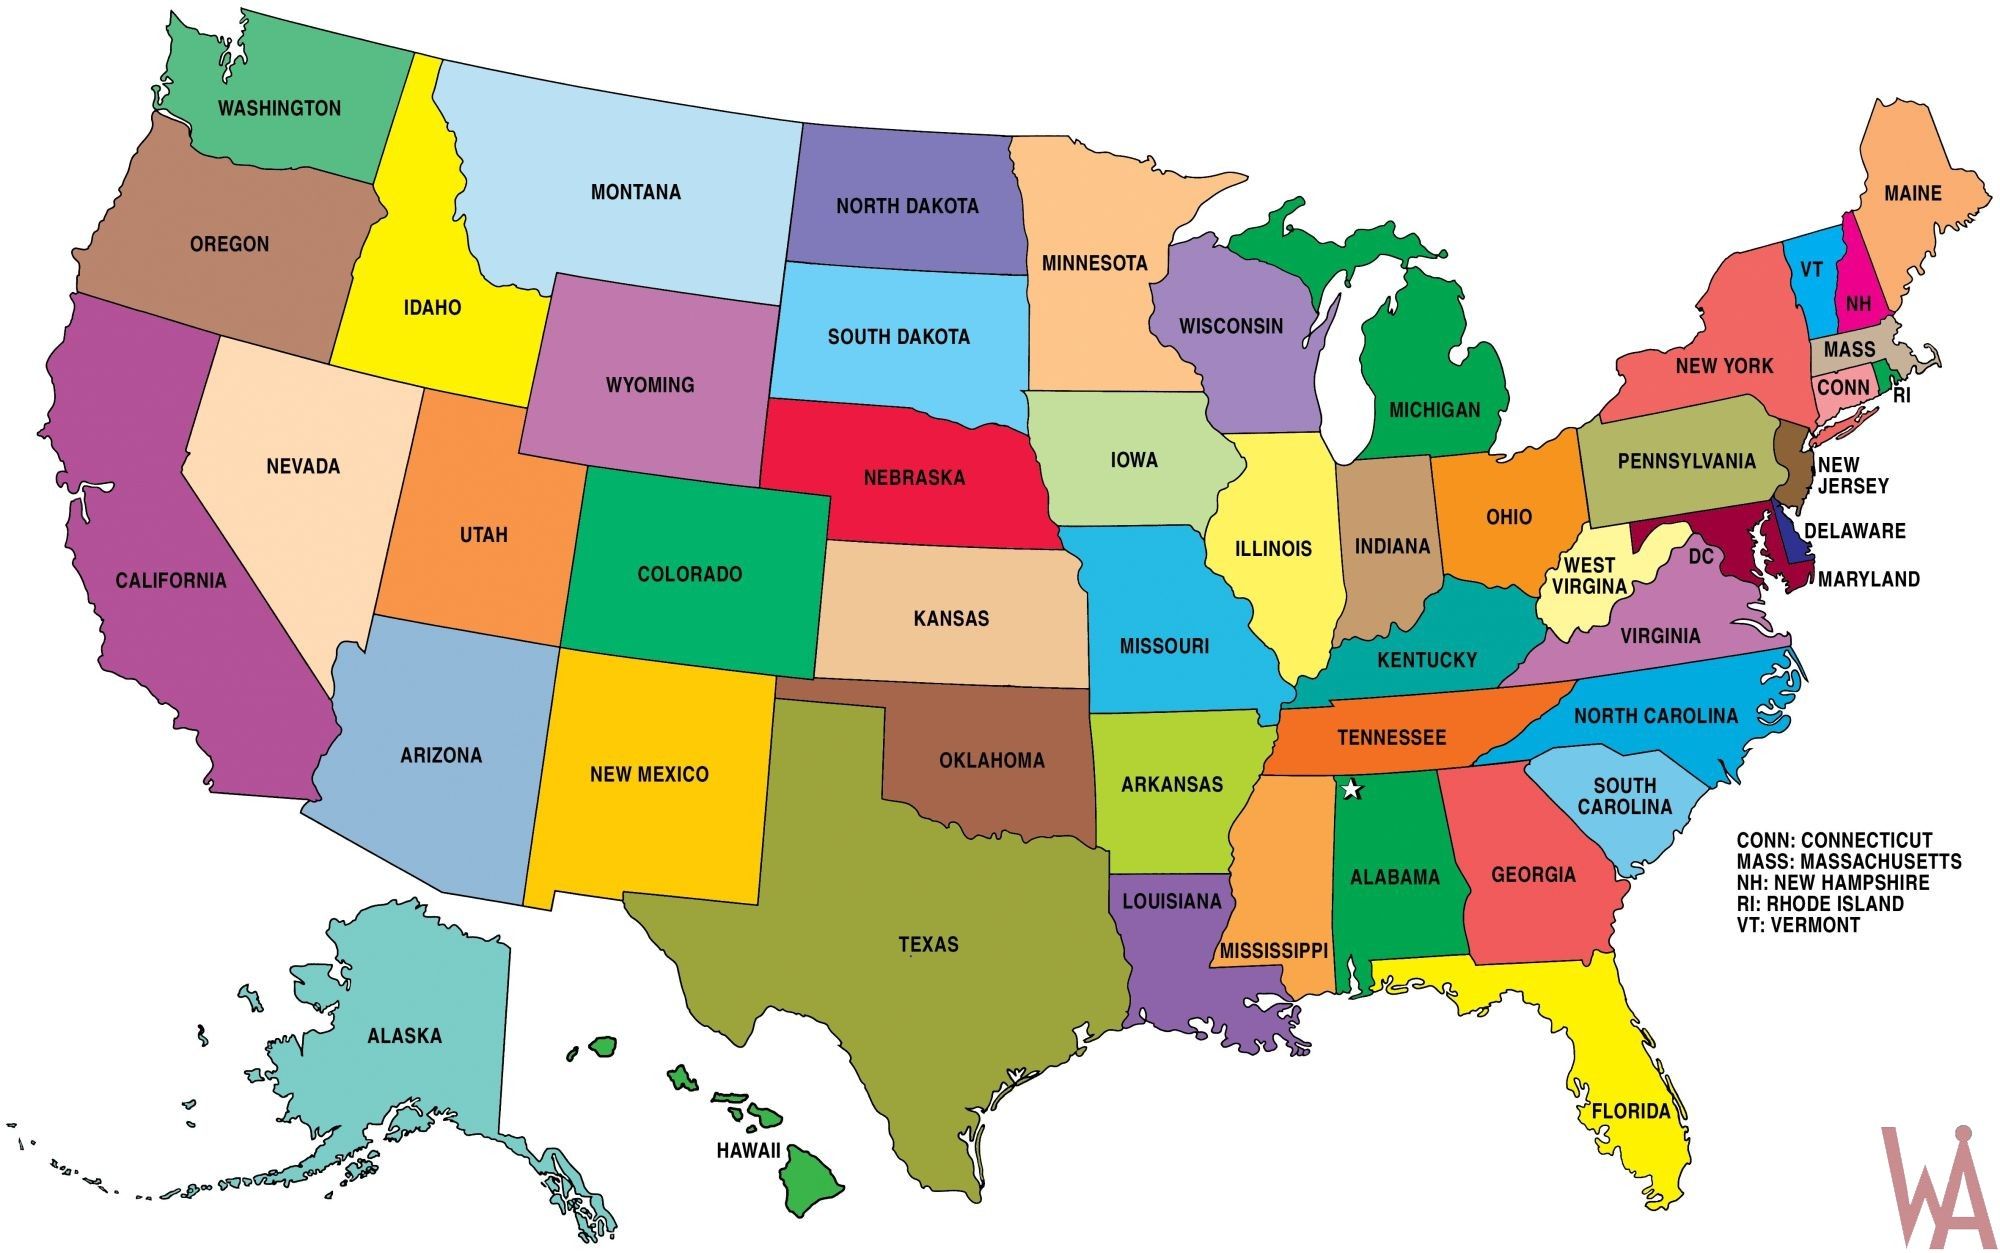 Hd Wallpaper Large State Map of the United States